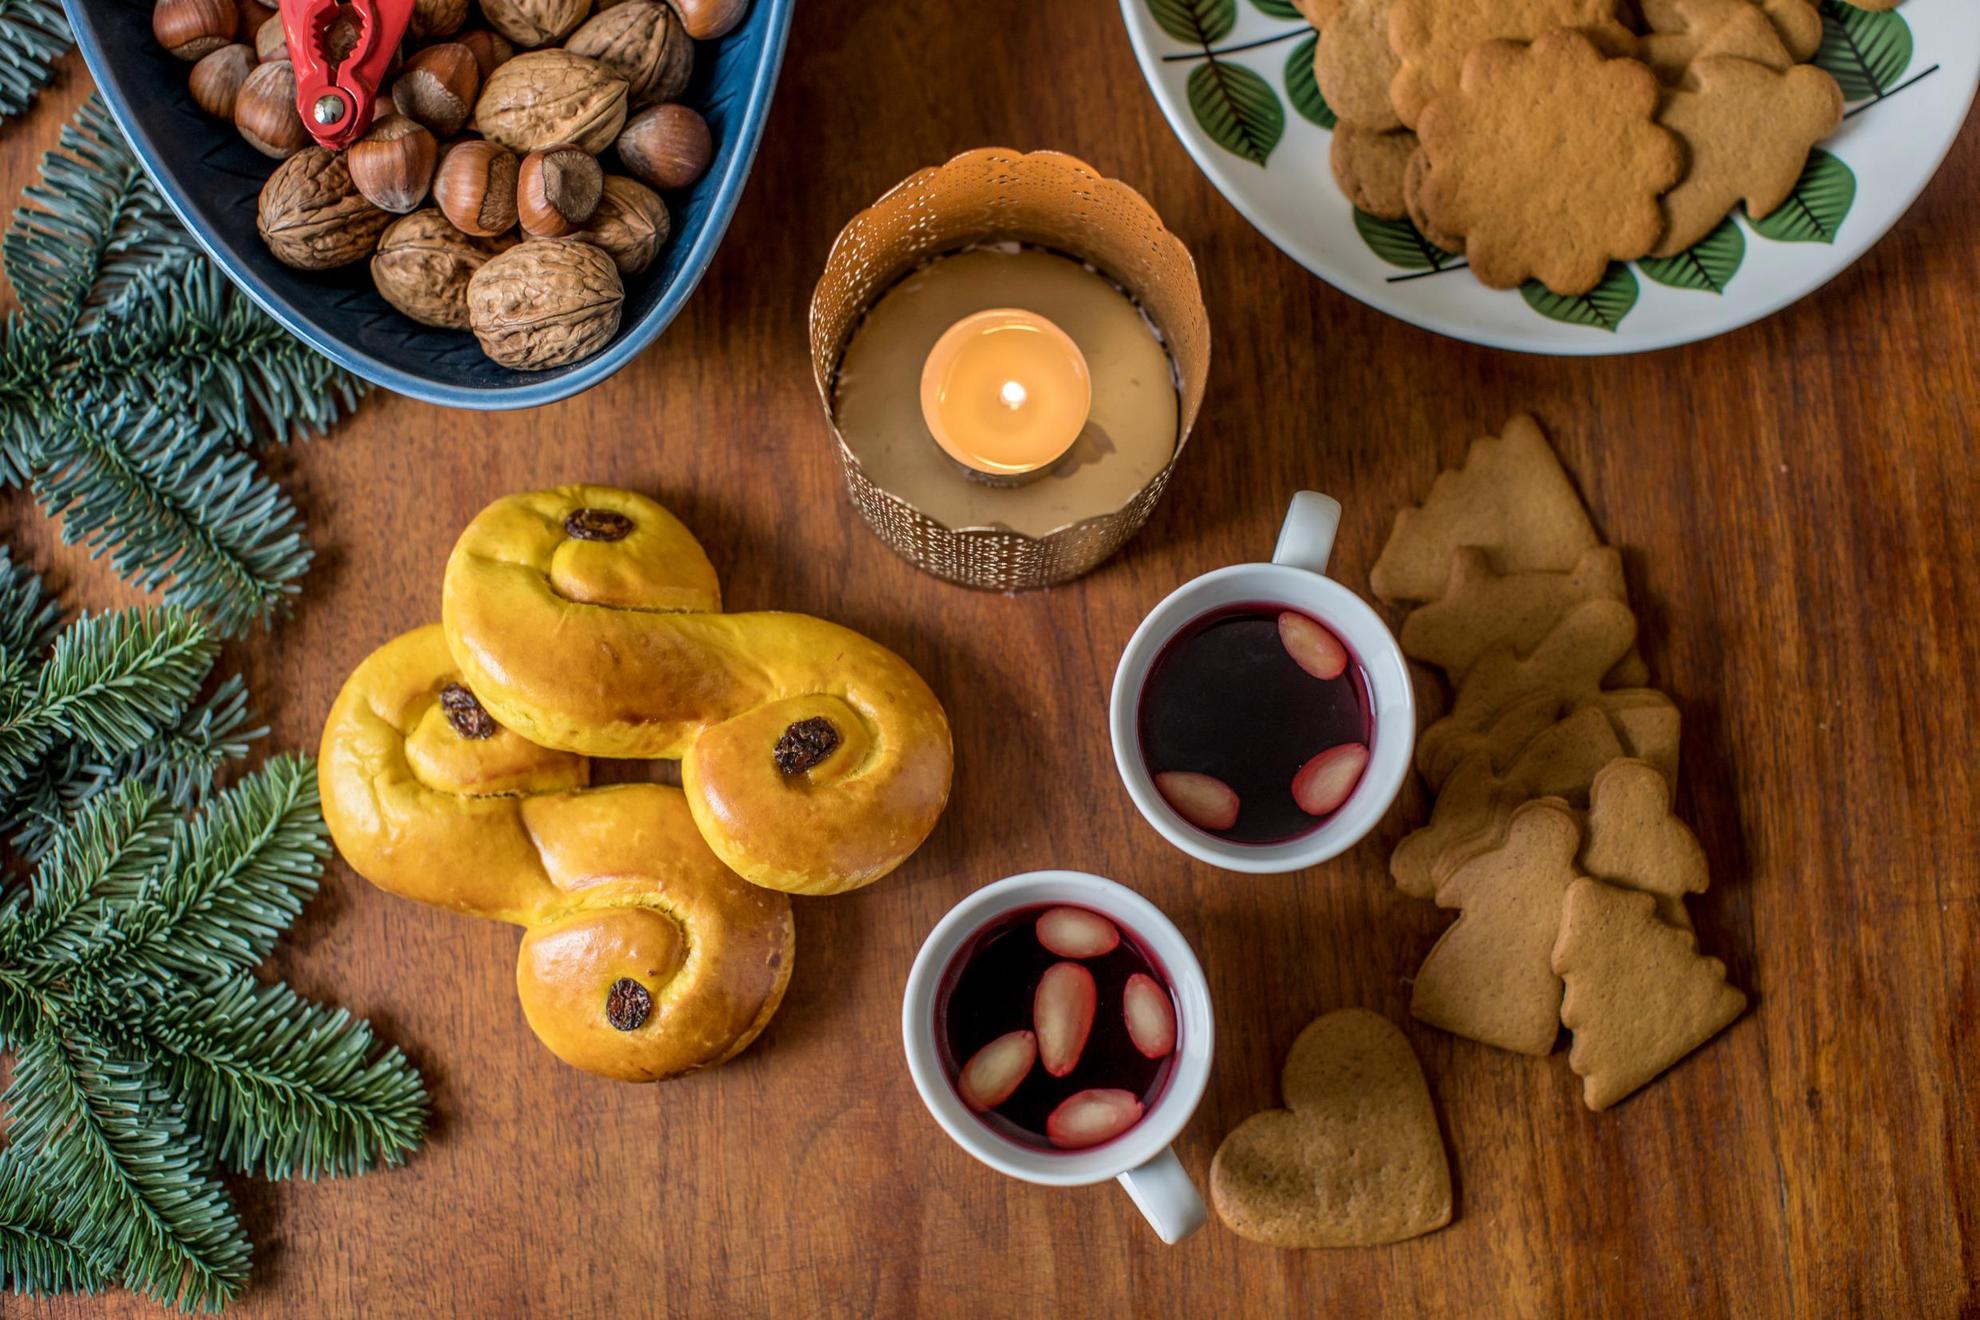 A table spread with typical Swedish Christmas treats and decorations, mulled wine, nuts, gingerbread cookies, lussebullar and pine twigs.